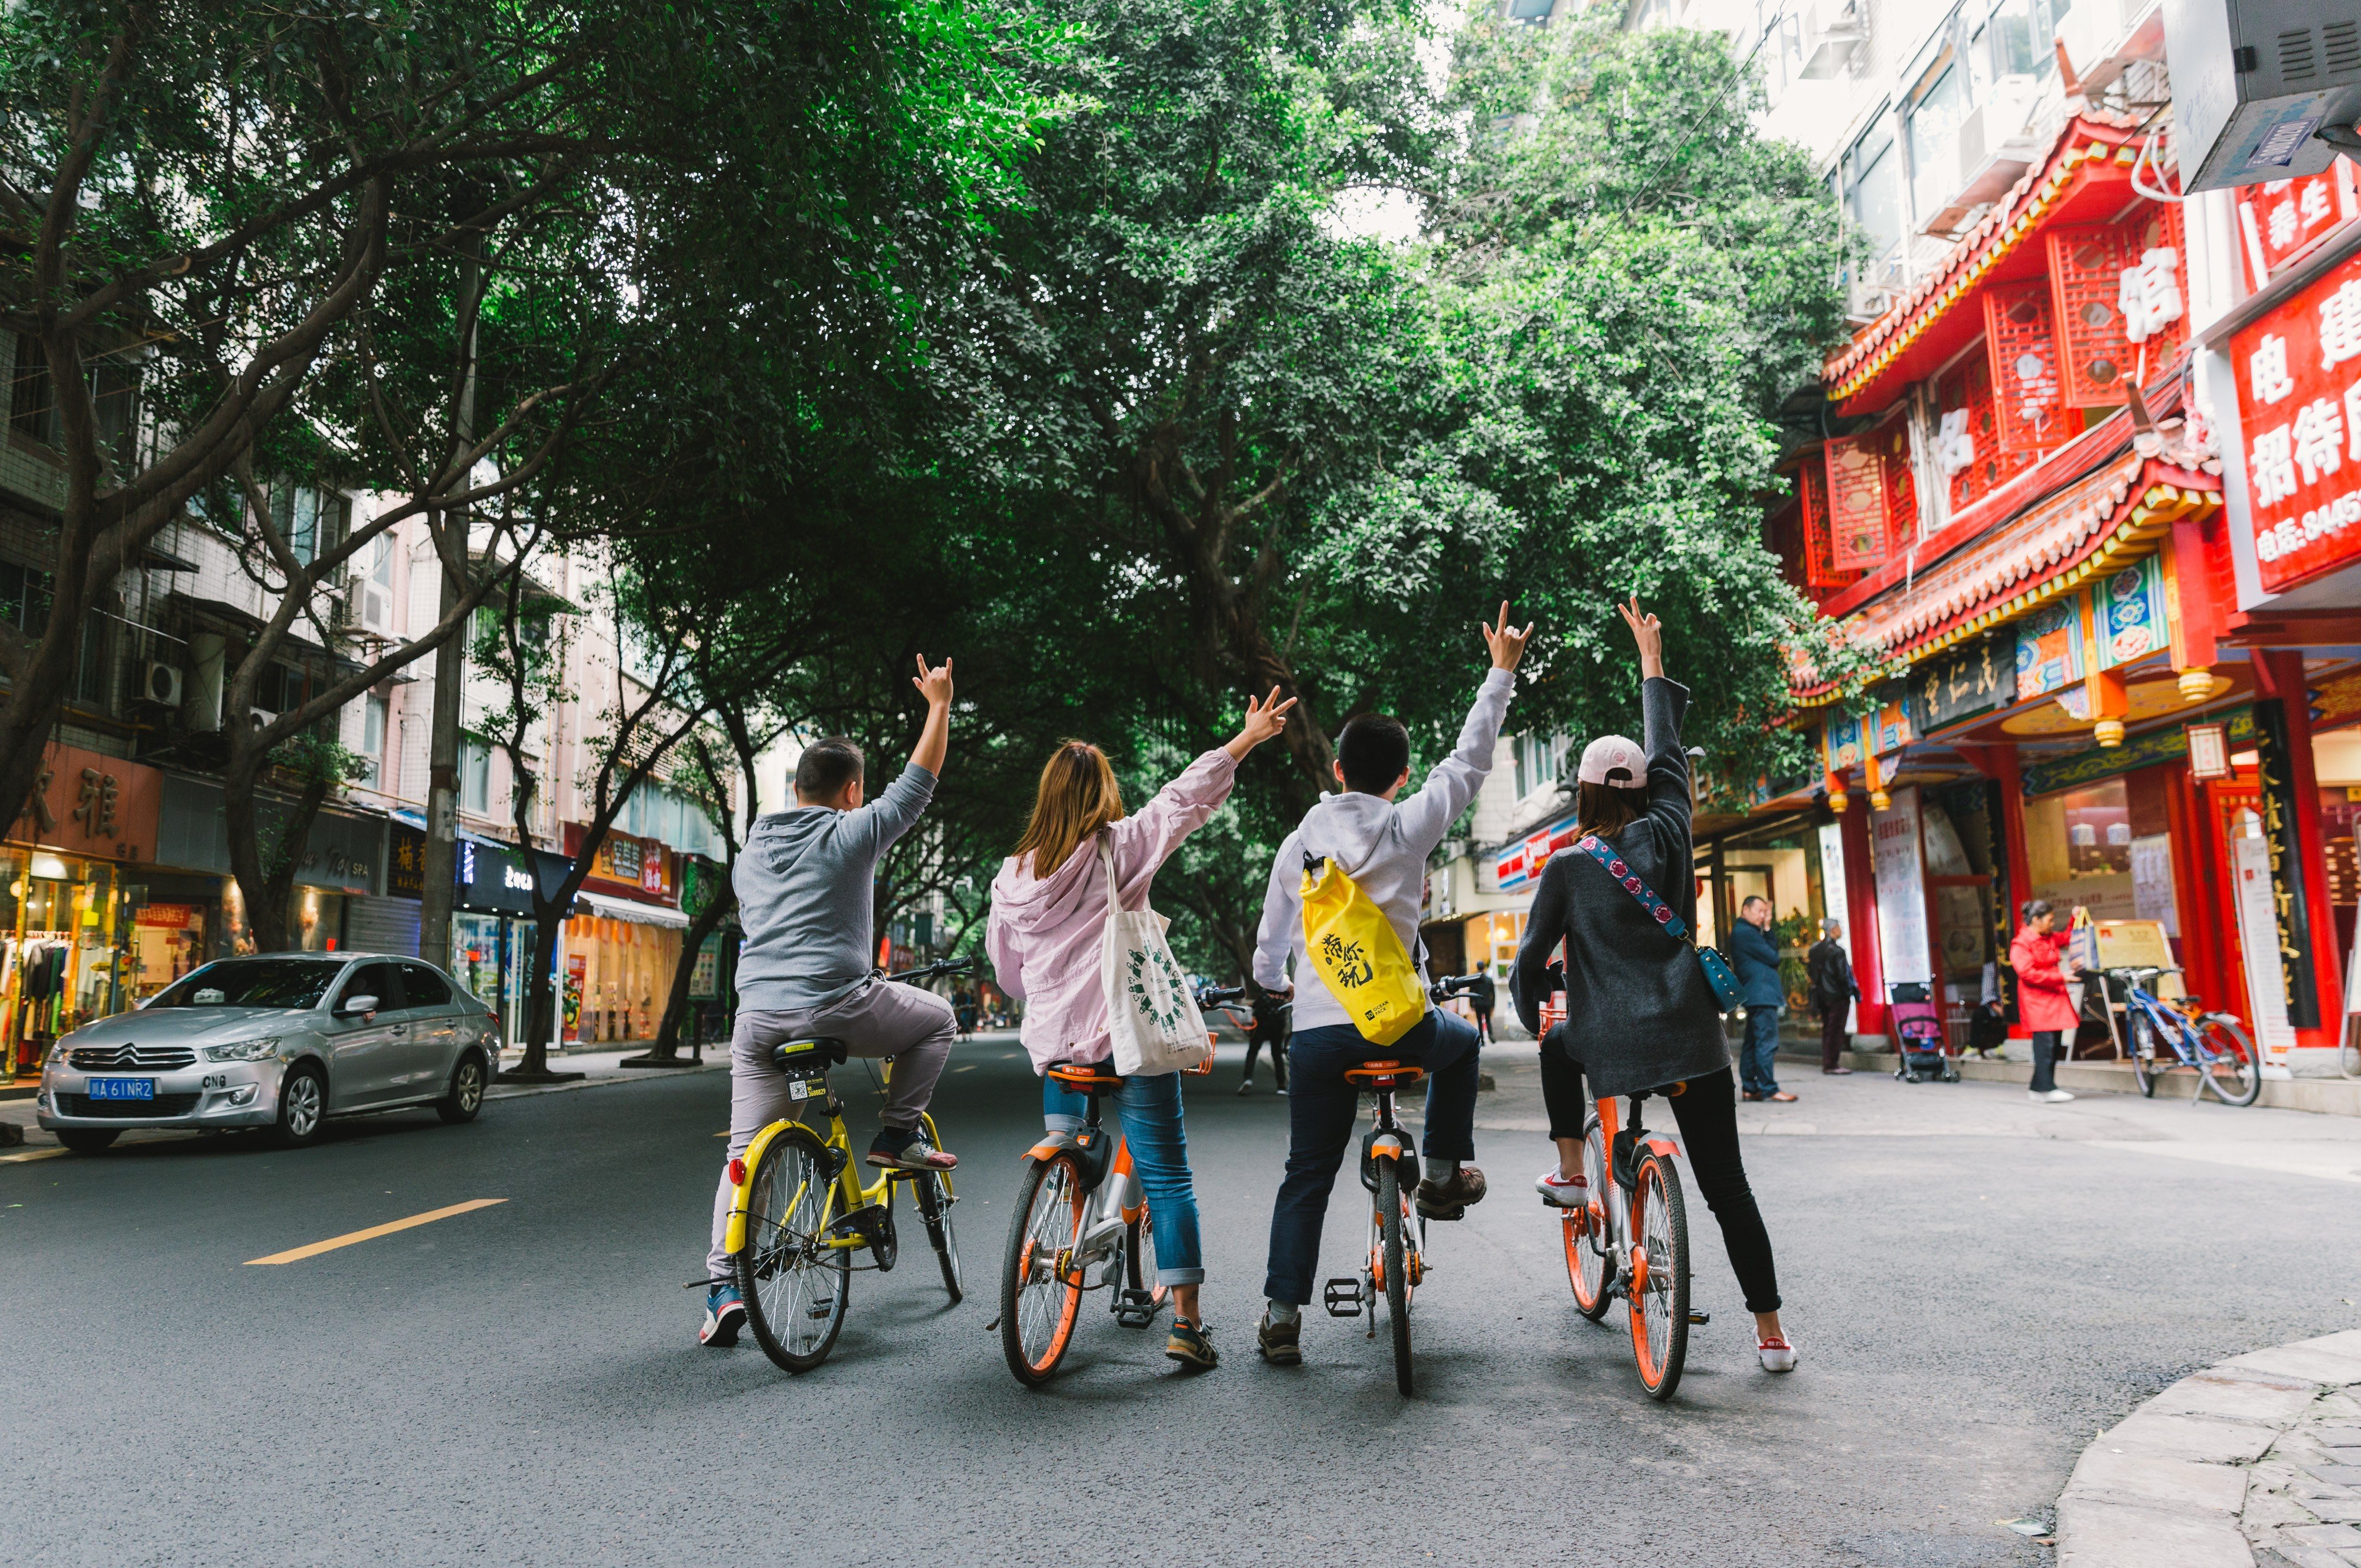 Tourists and their Bikego guide tour the back alleys of Chengdu.